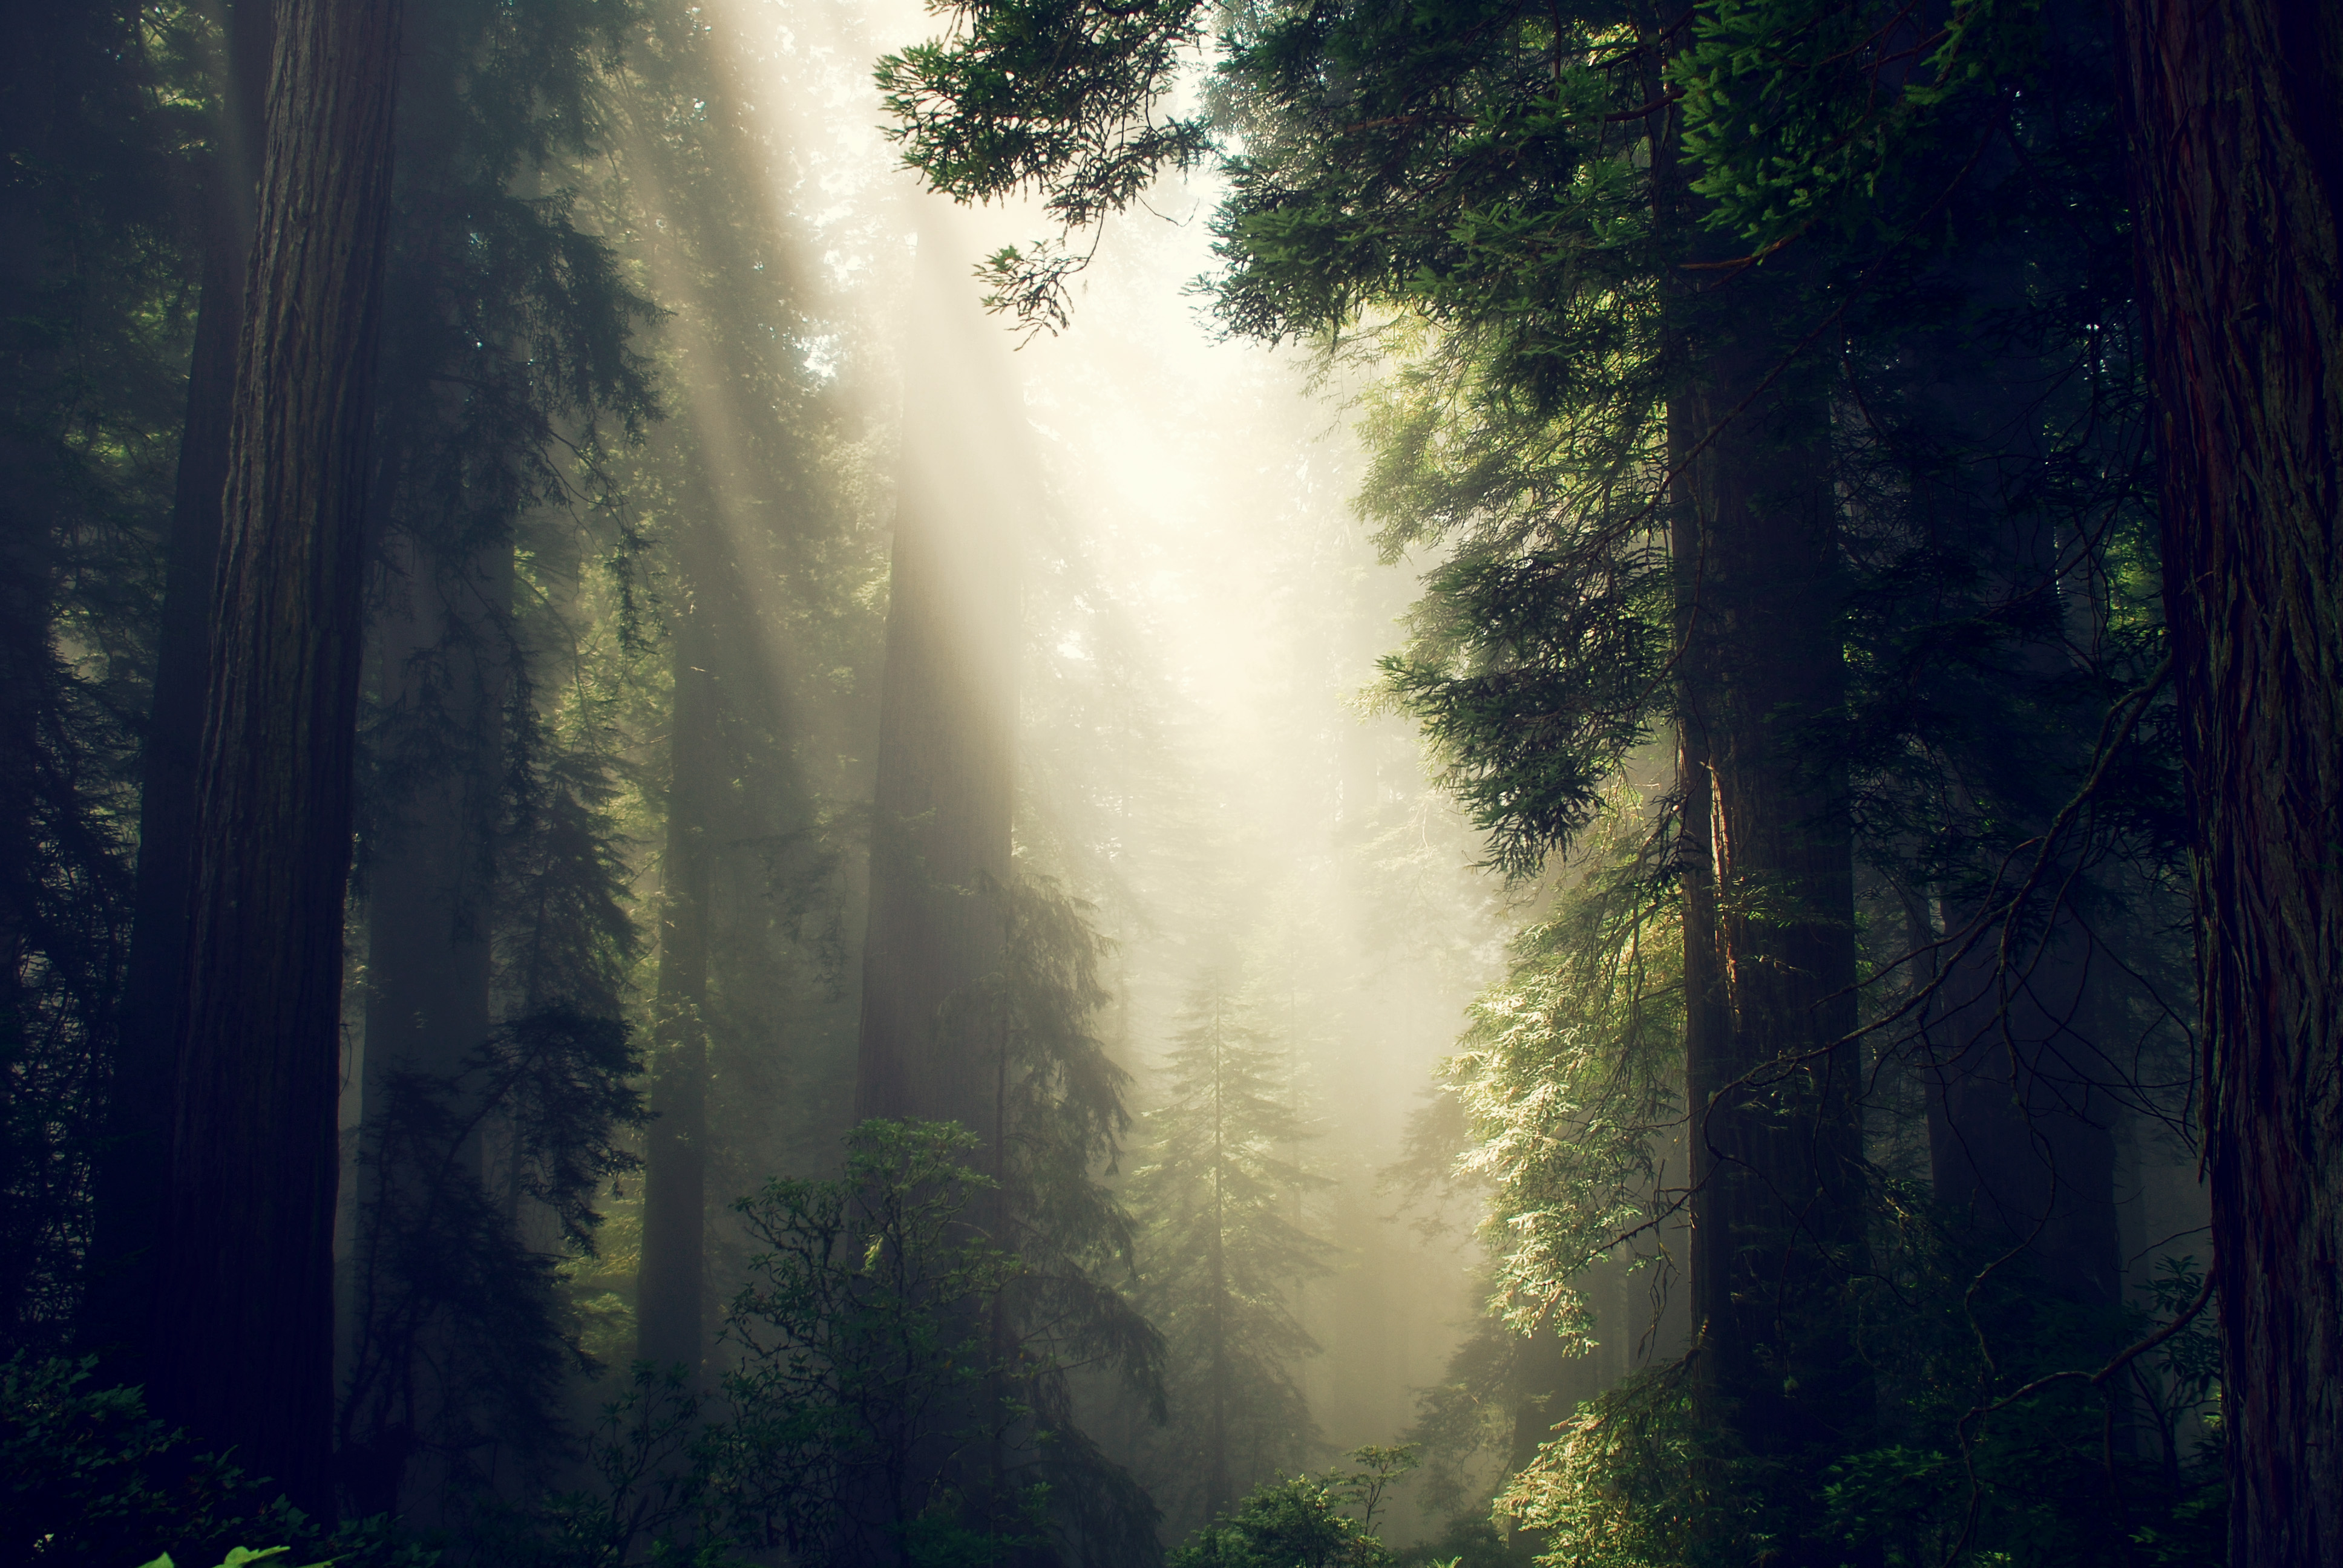 103248 download wallpaper nature, trees, forest, fog, sunlight screensavers and pictures for free